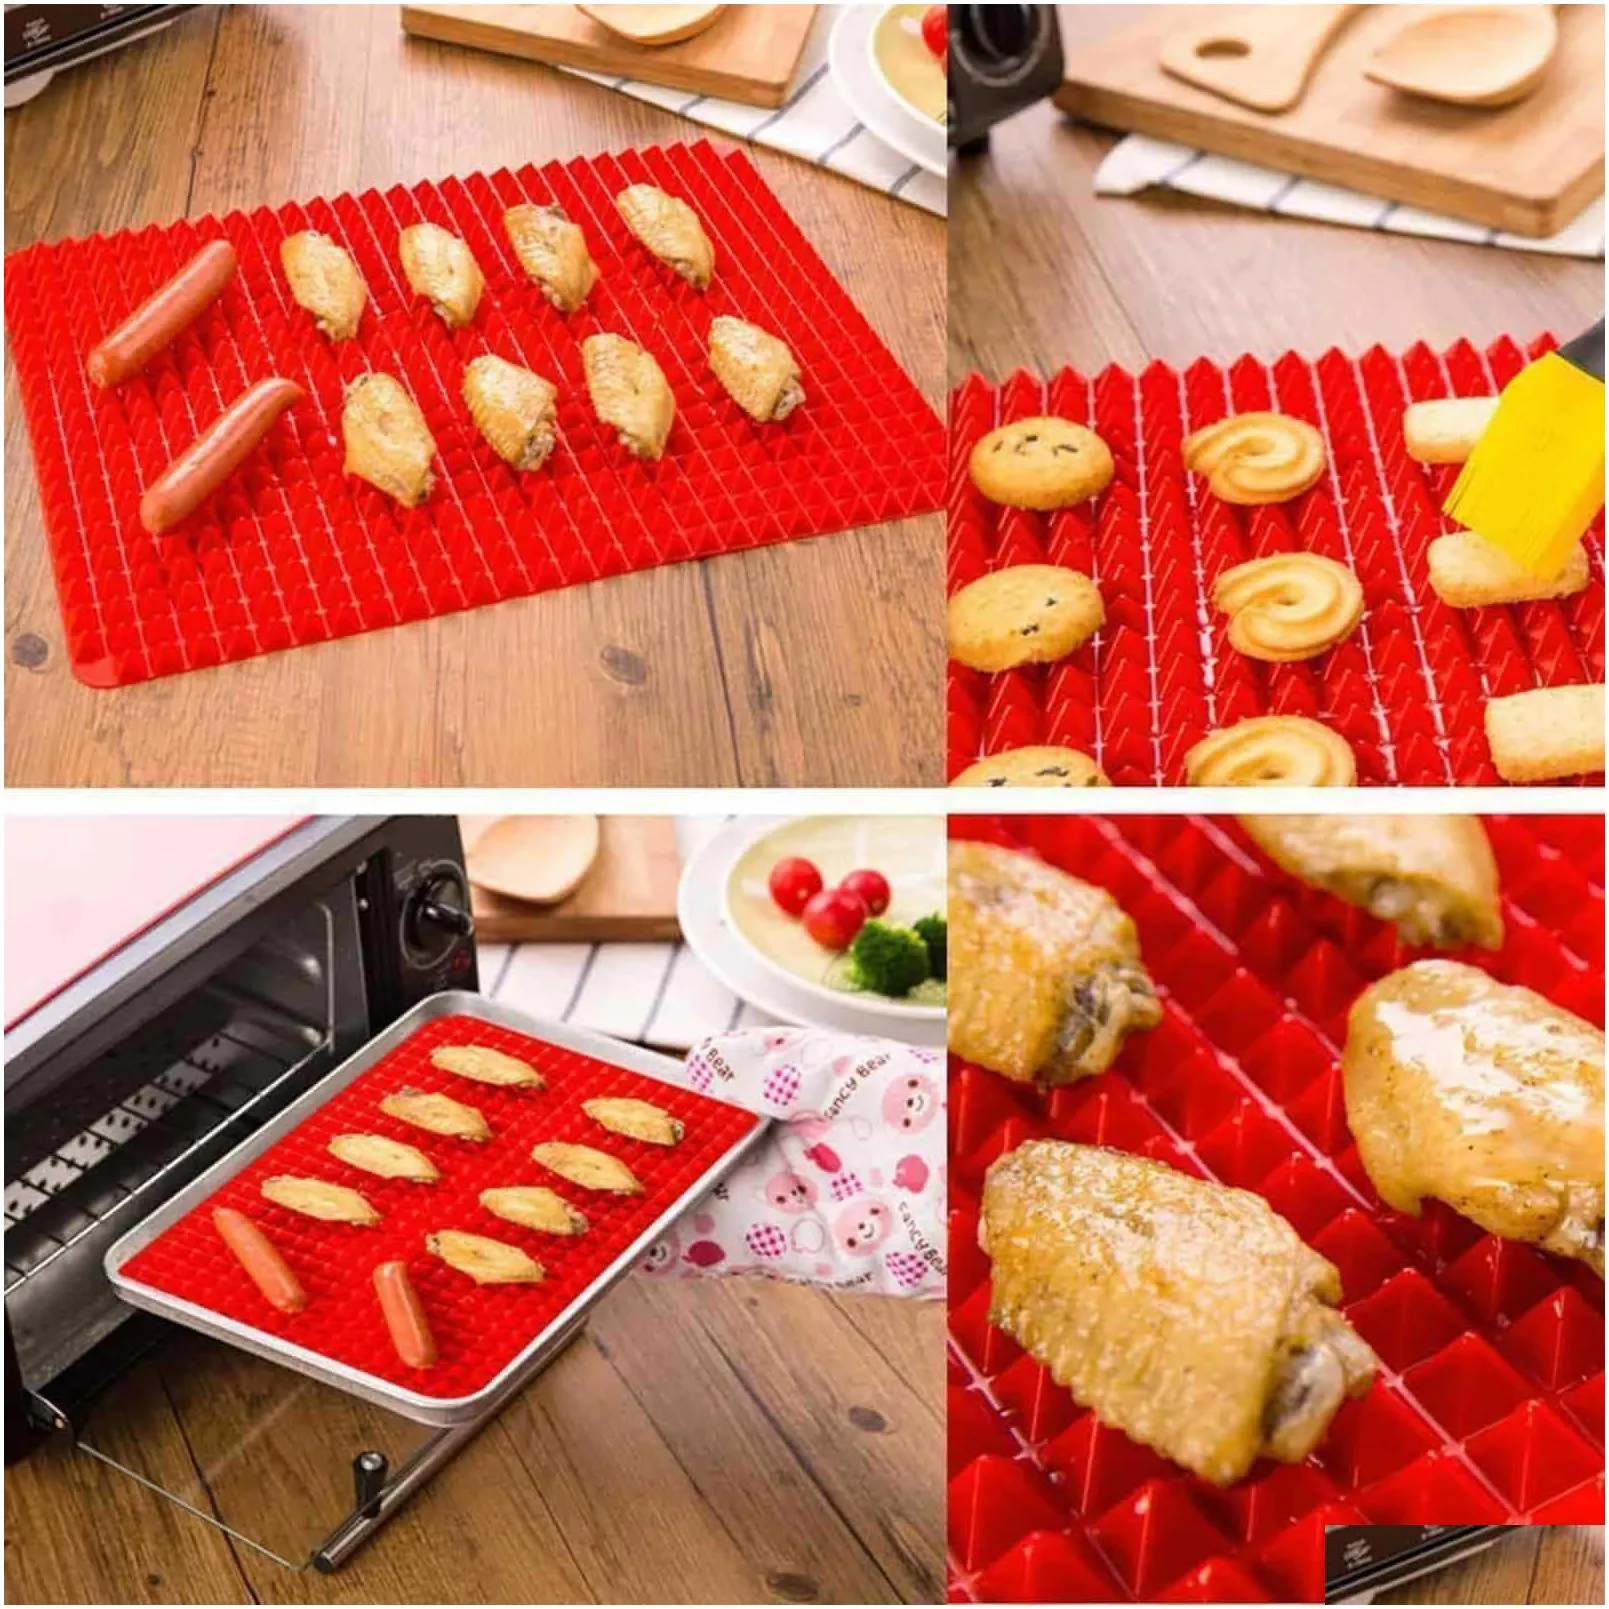 Baking & Pastry Tools New Sile Cooking Mat Pyramid Sheets Baking Pan Bbq Raised Drop Delivery Home Garden Kitchen, Dining Bar Bakeware Dha81